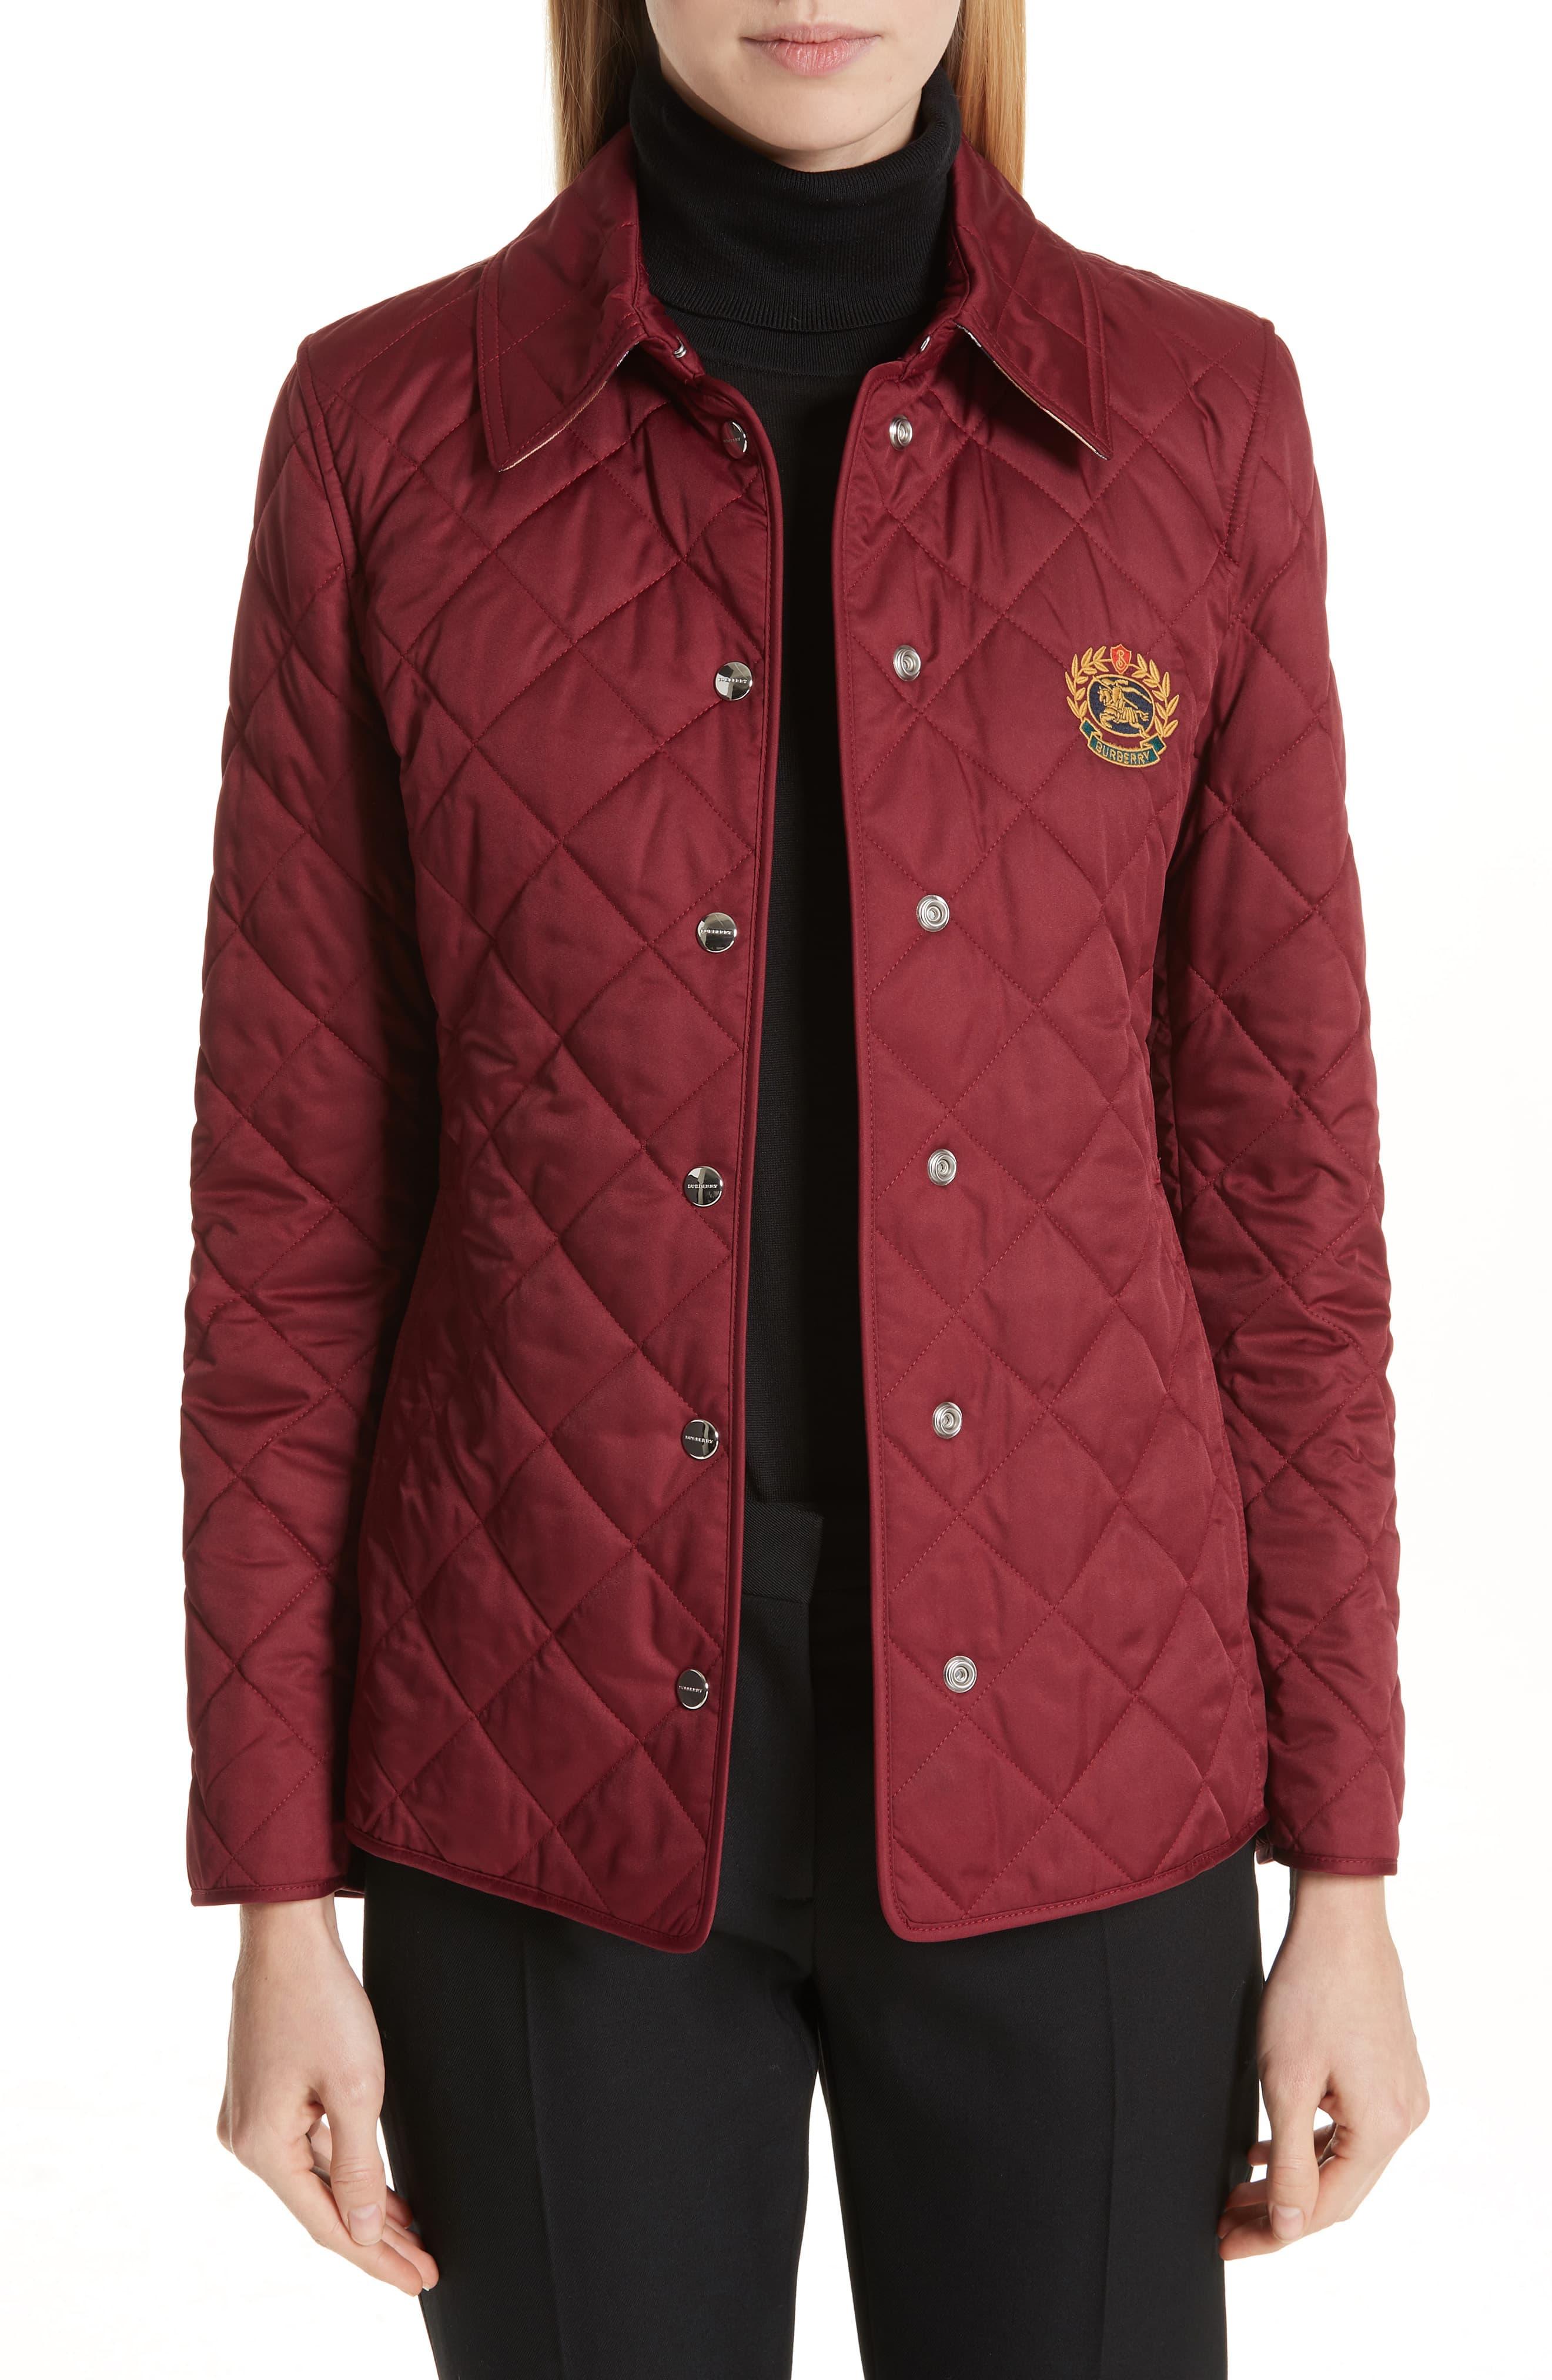 burberry franwell diamond quilted jacket